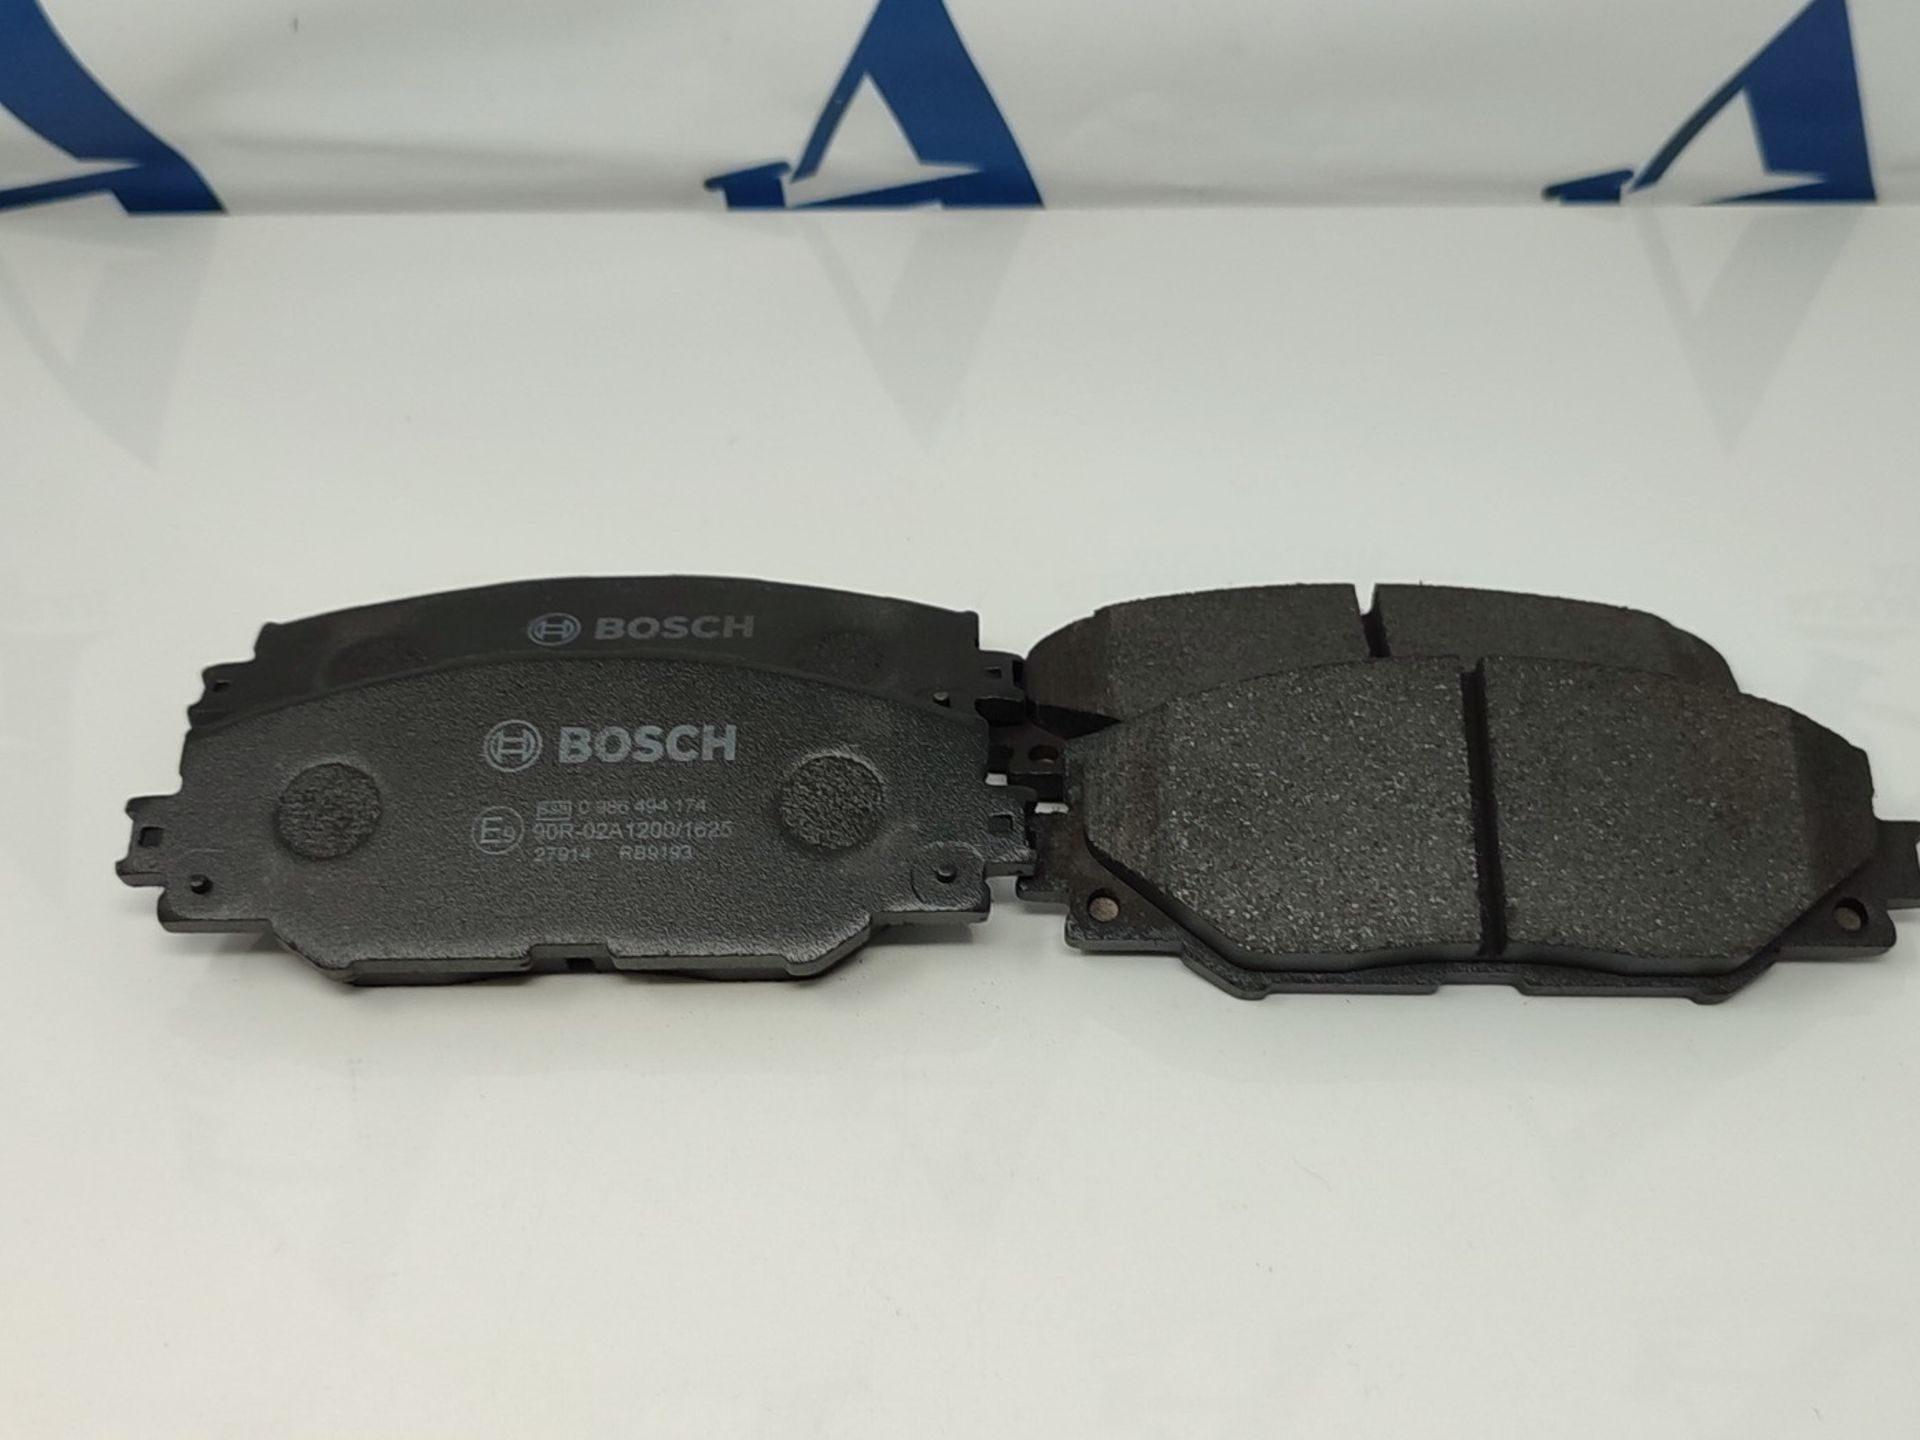 Bosch BP1085 Brake Pads - Front Axle - ECE-R90 Certified - 1 Set of 4 Pads - Image 3 of 3